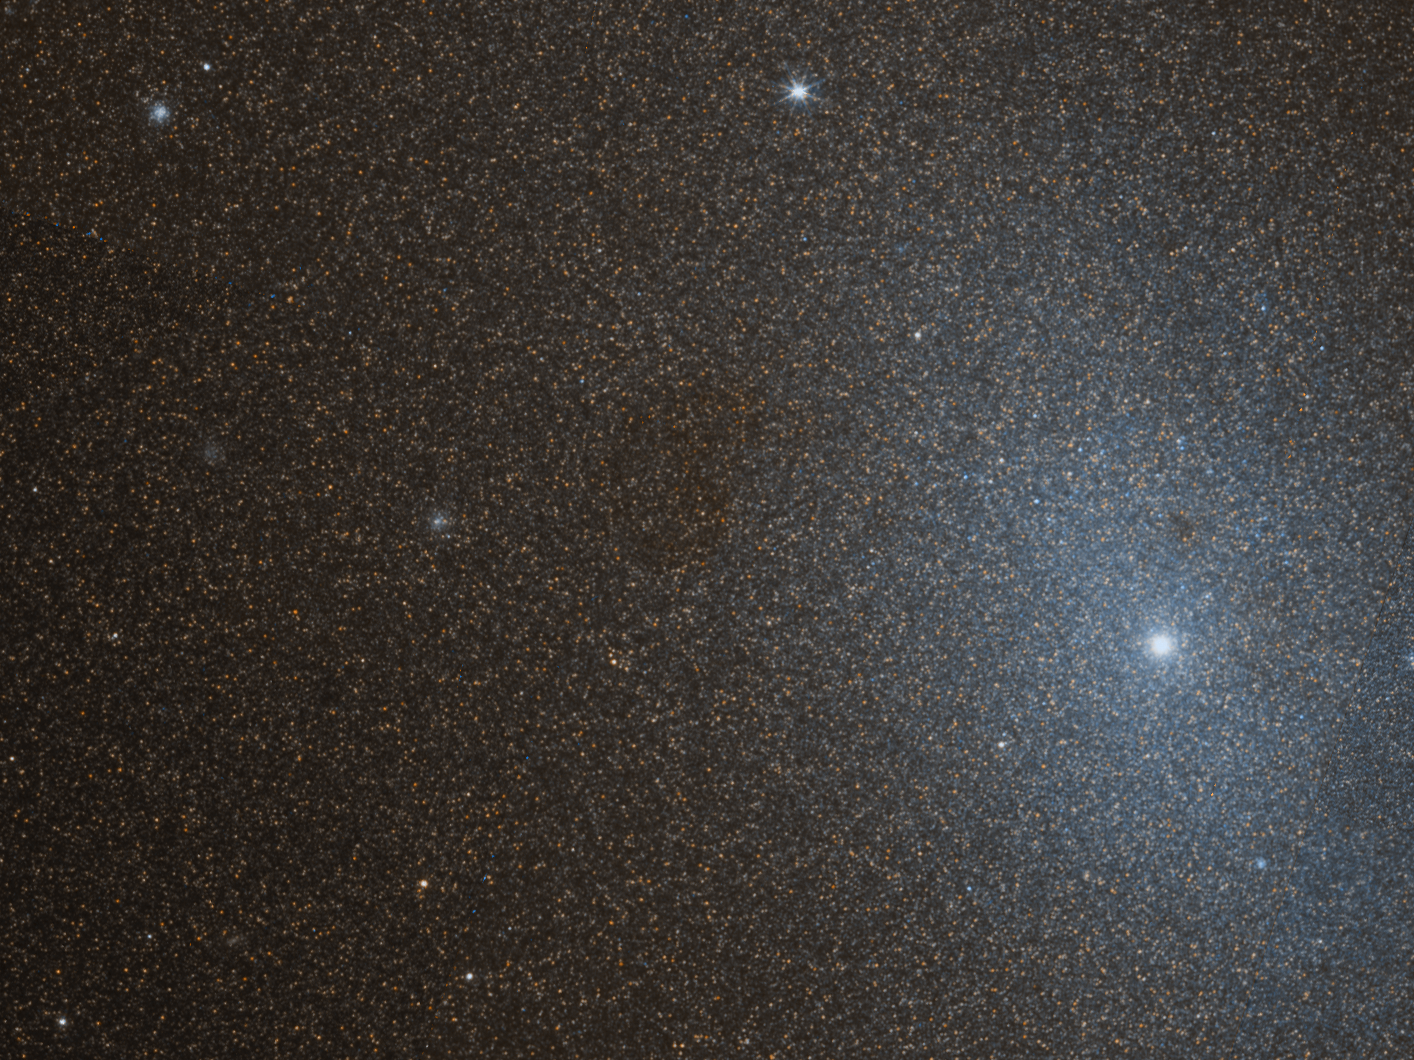 Several faint stars crowd the image, with a larger white-blue galaxy core near the right side of the image.